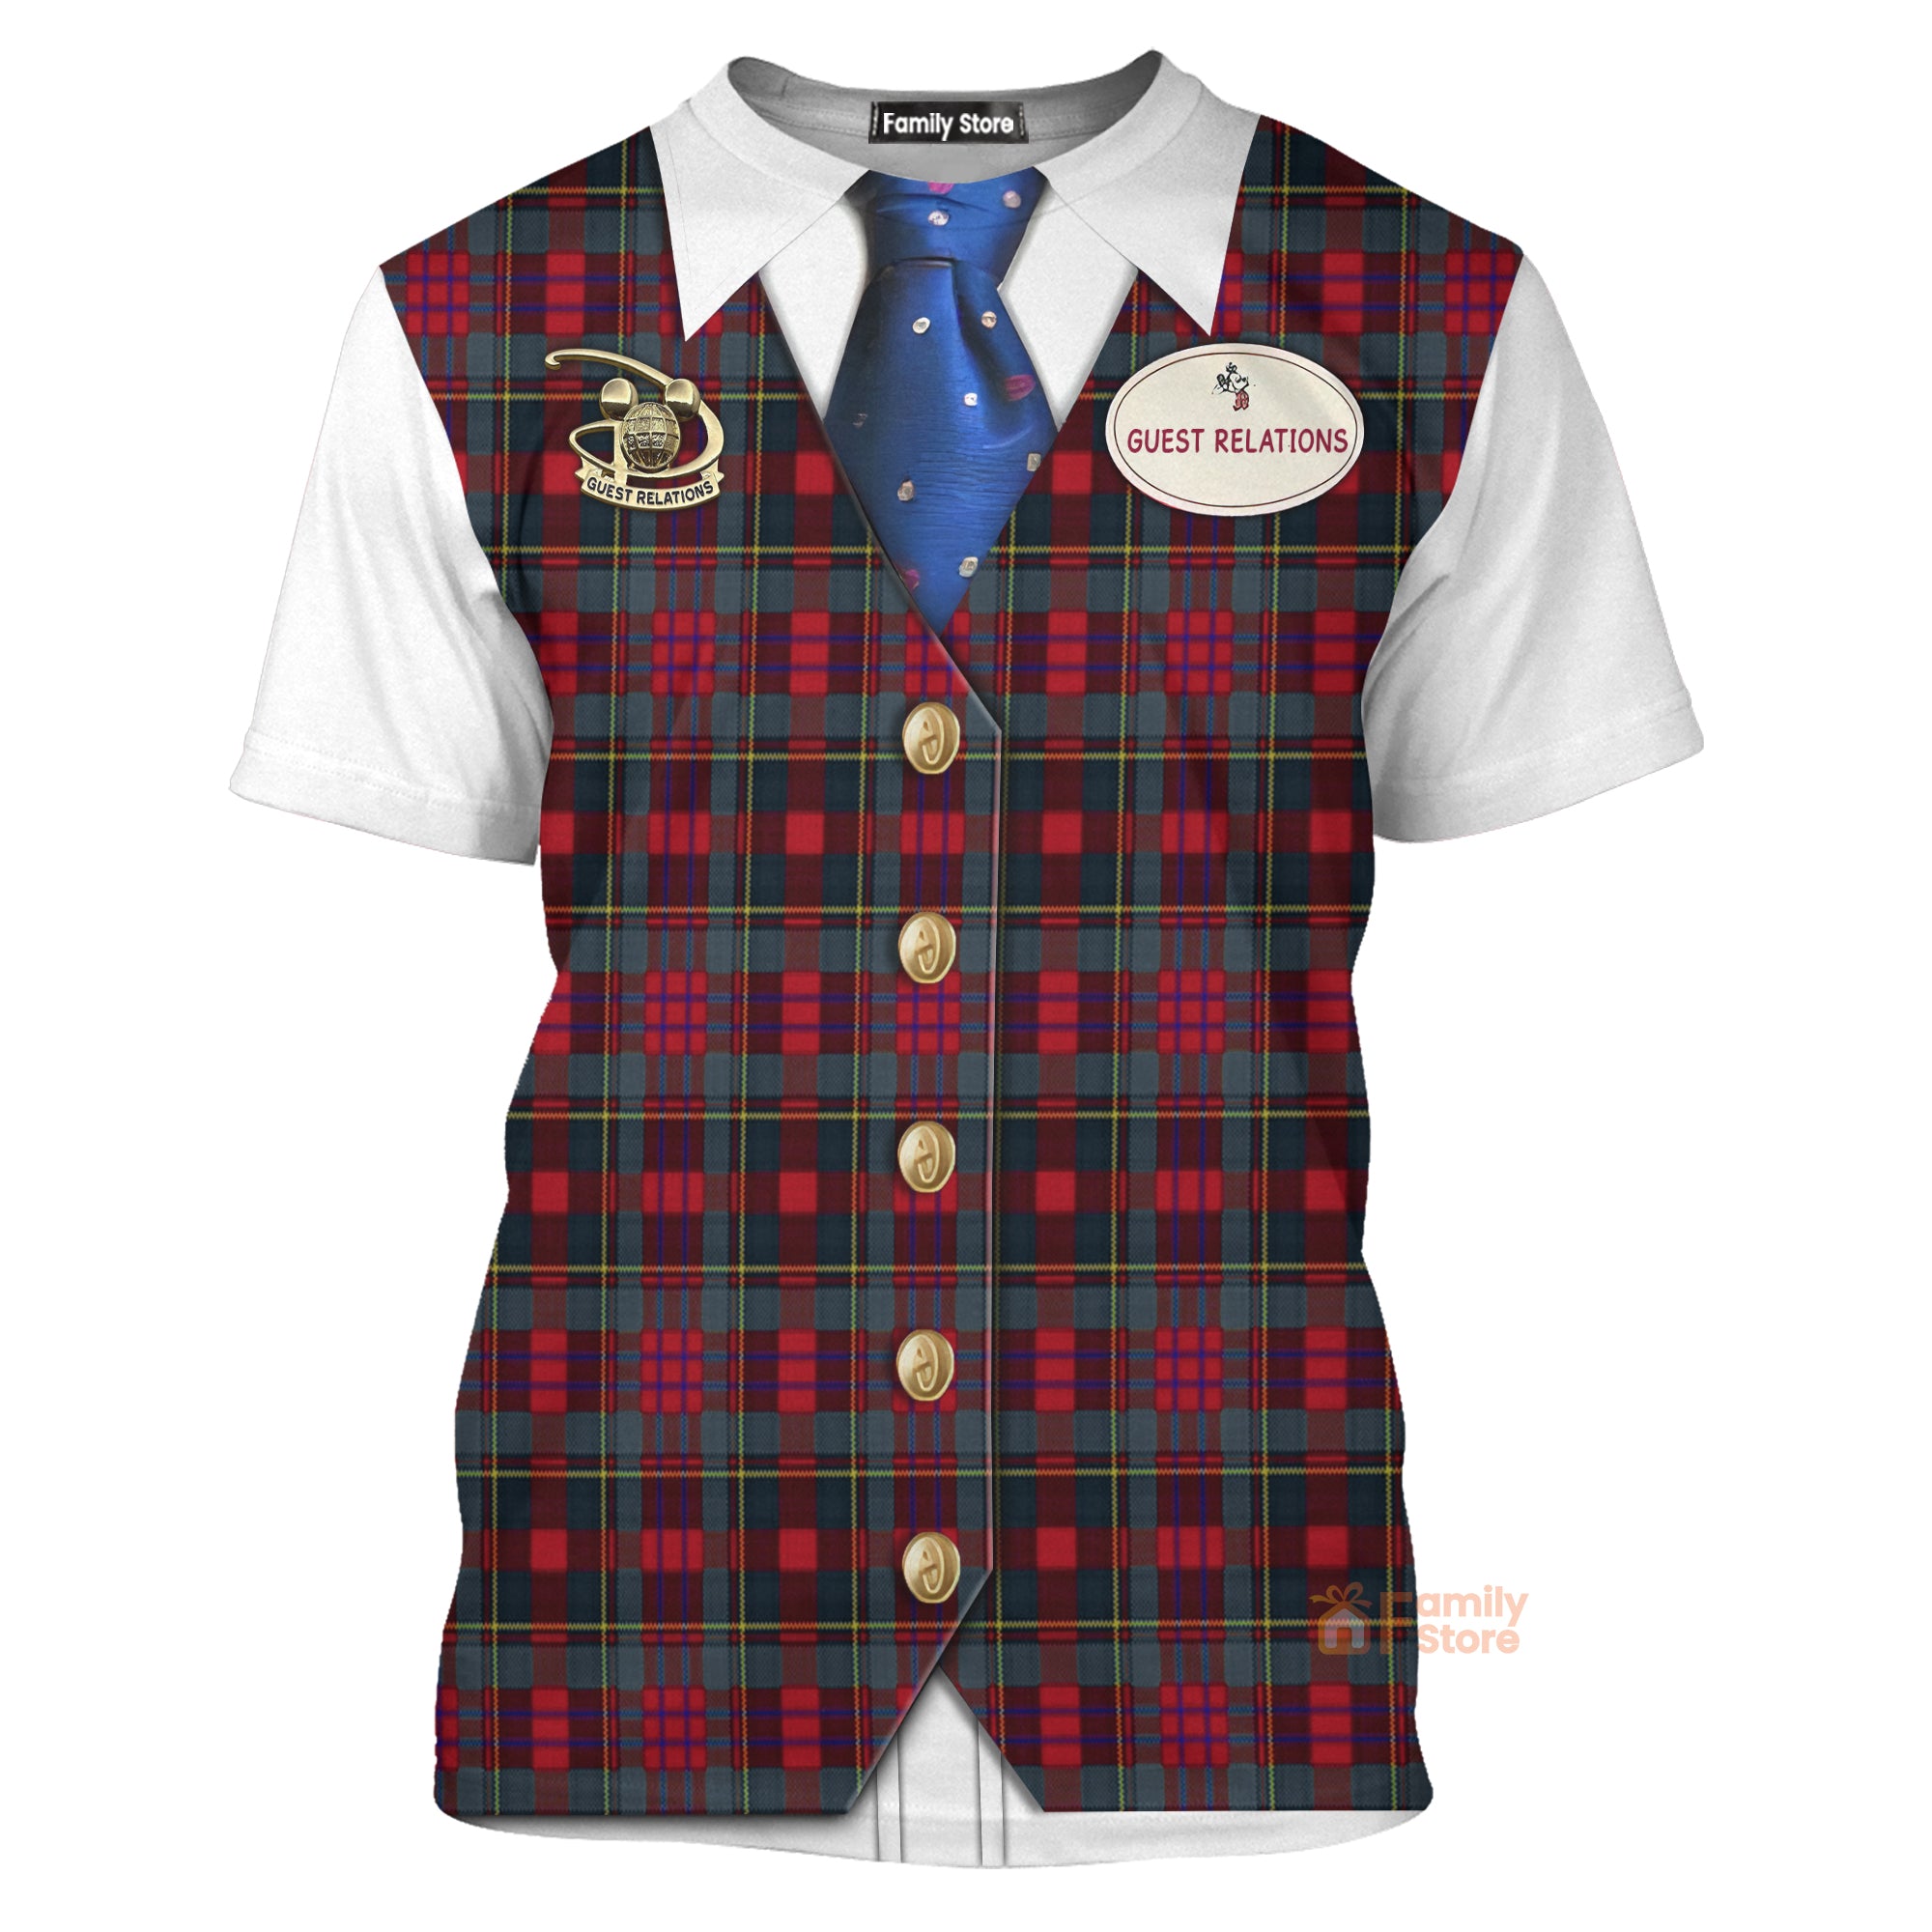 Guest Relations Outfit Disney Cast Member Costume T-Shirt For Men